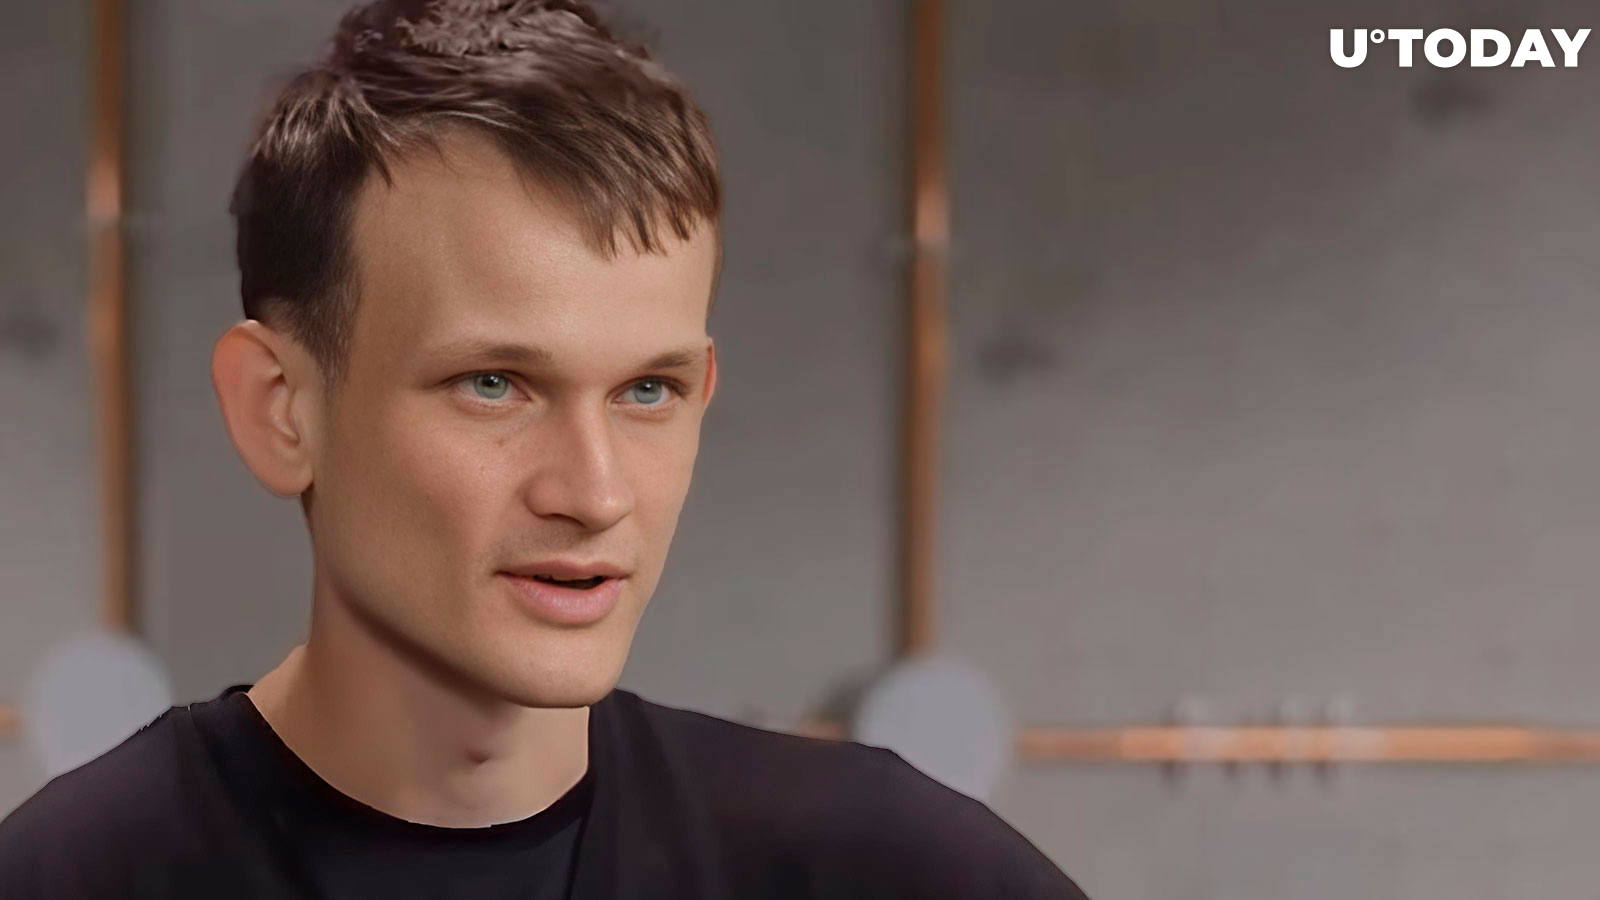 Ethereum's Vitalik Buterin Says AI Could Pose "Existential Risk"